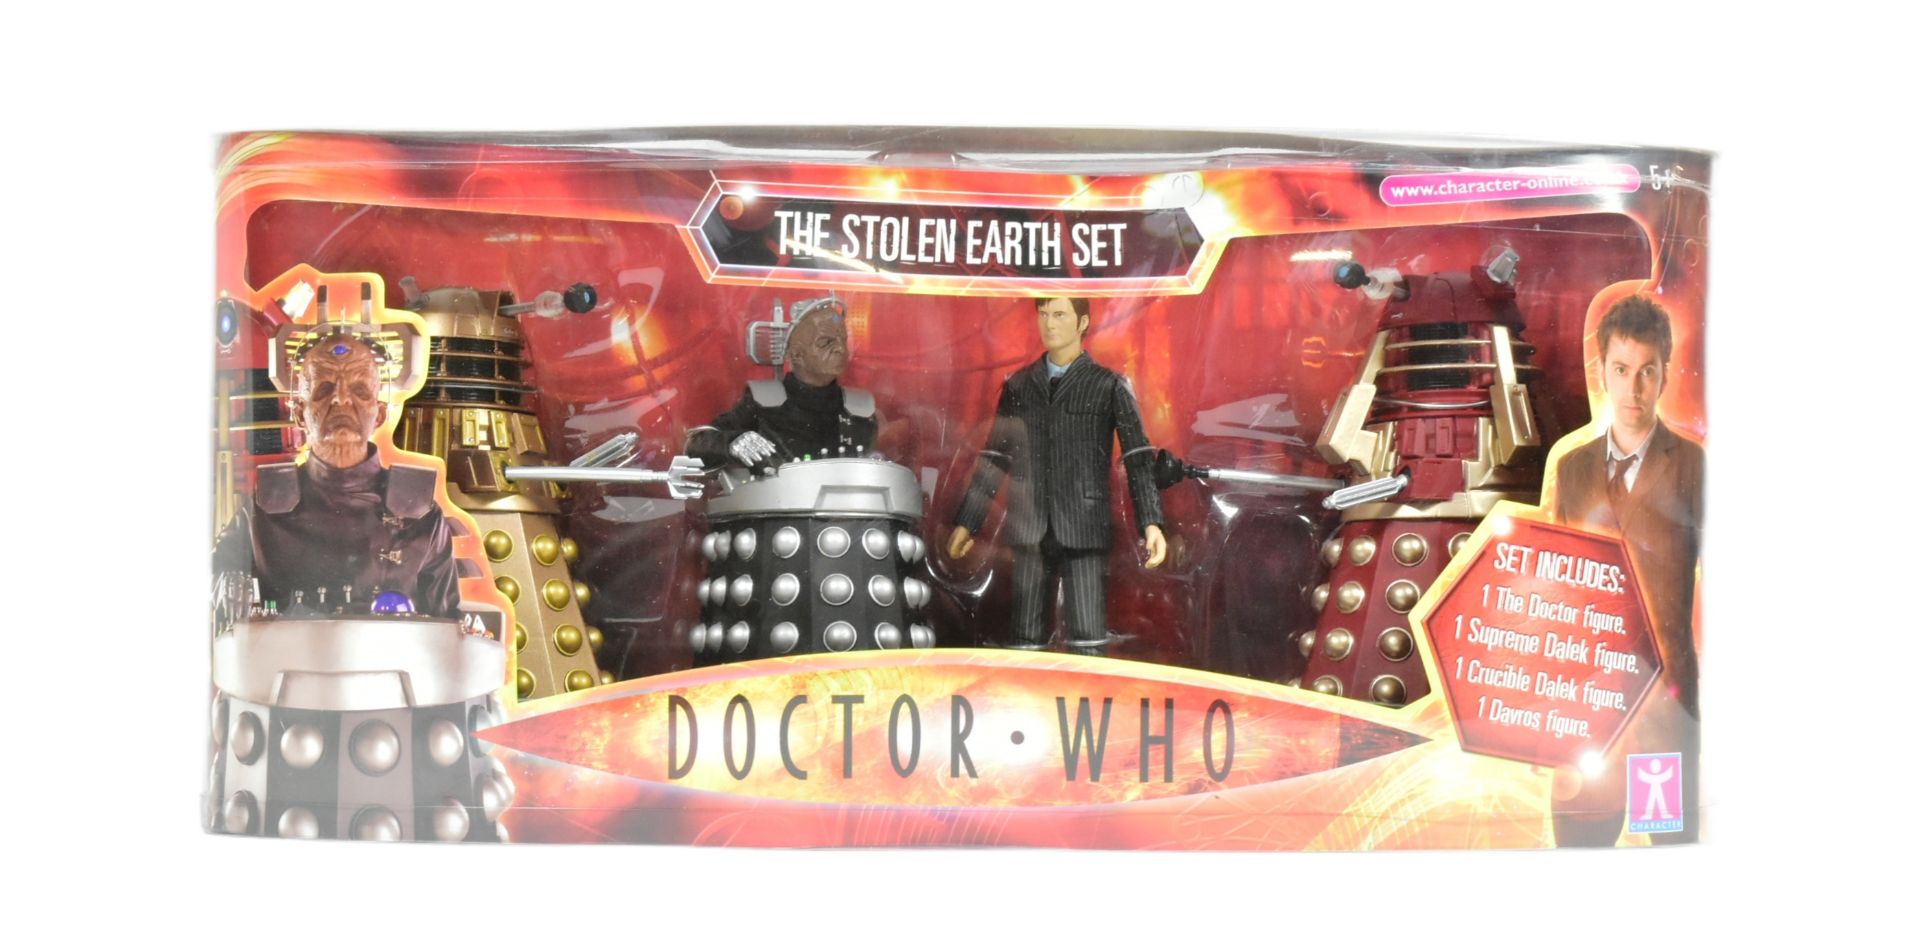 DOCTOR WHO - STOLEN EARTH SET - BOXED ACTION FIGURES